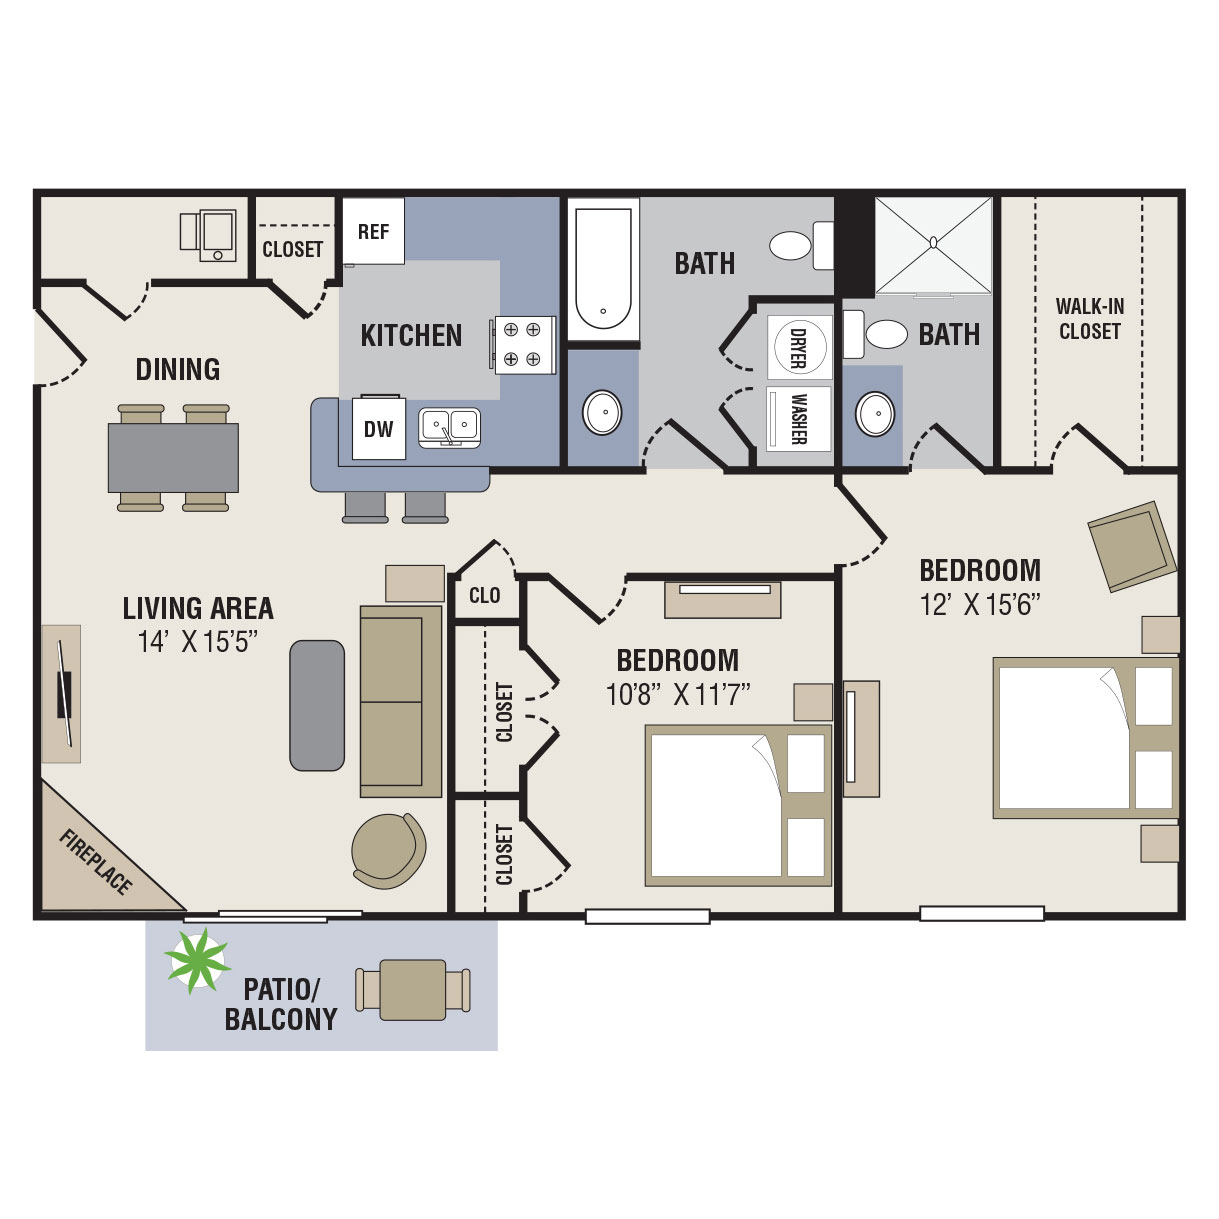 Informative Picture of 2BED-2BATH - 1050sqft